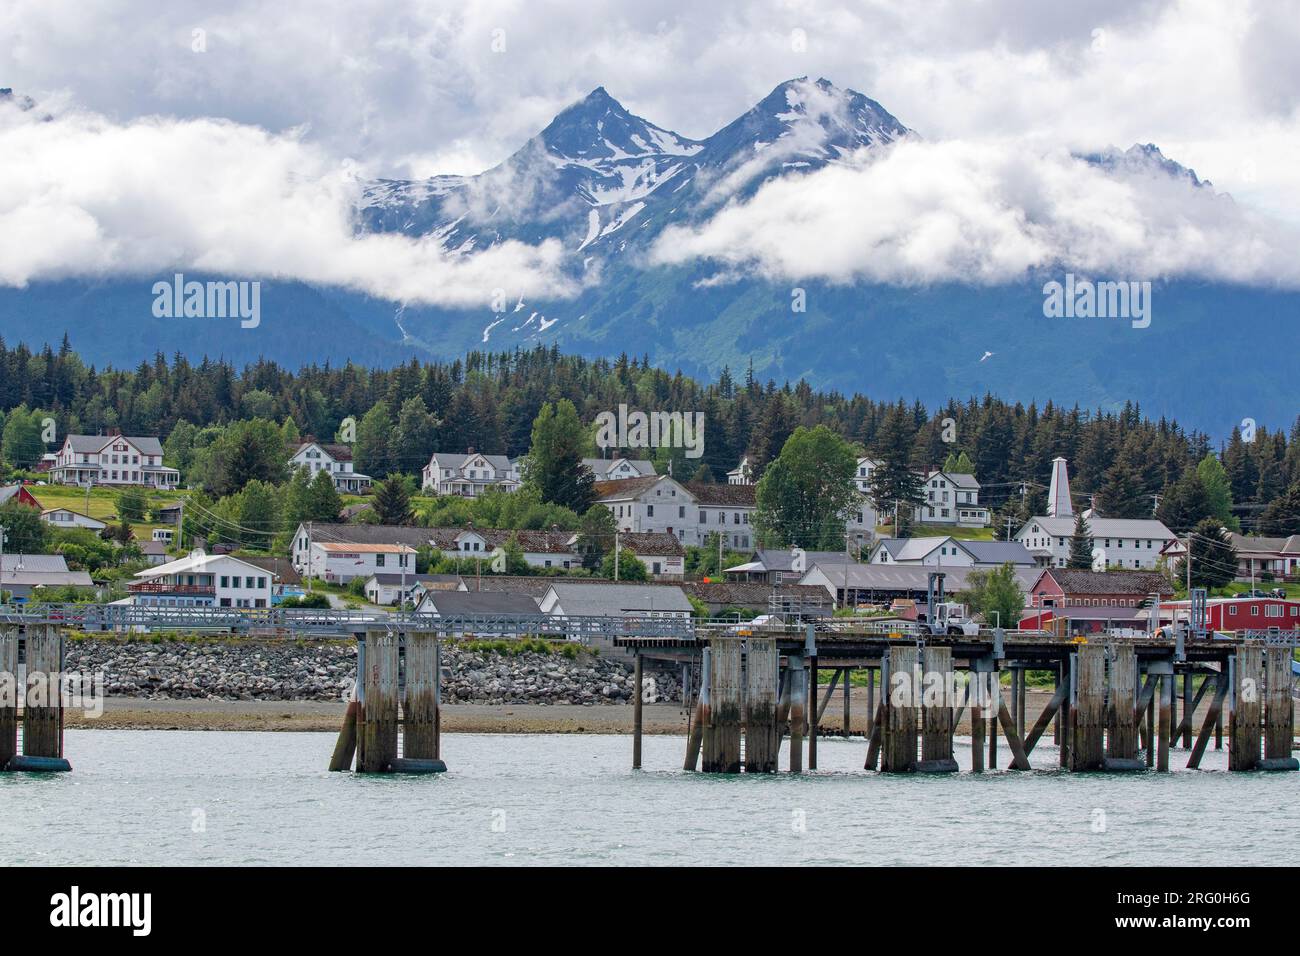 Mountains towering above Haines Stock Photo